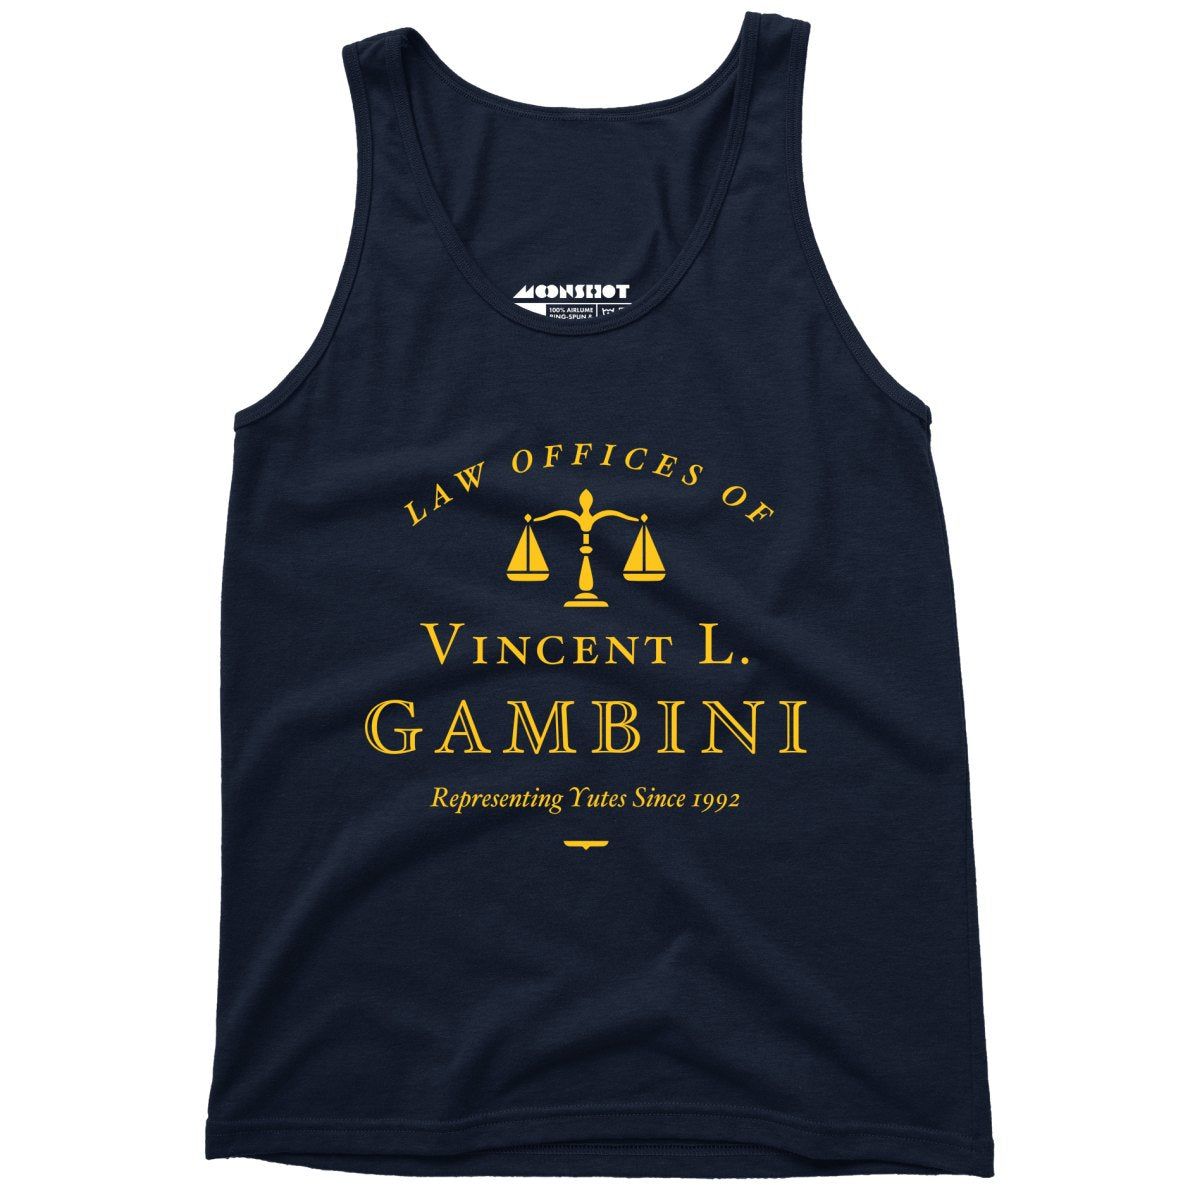 Law Offices of Vincent L. Gambini - Unisex Tank Top